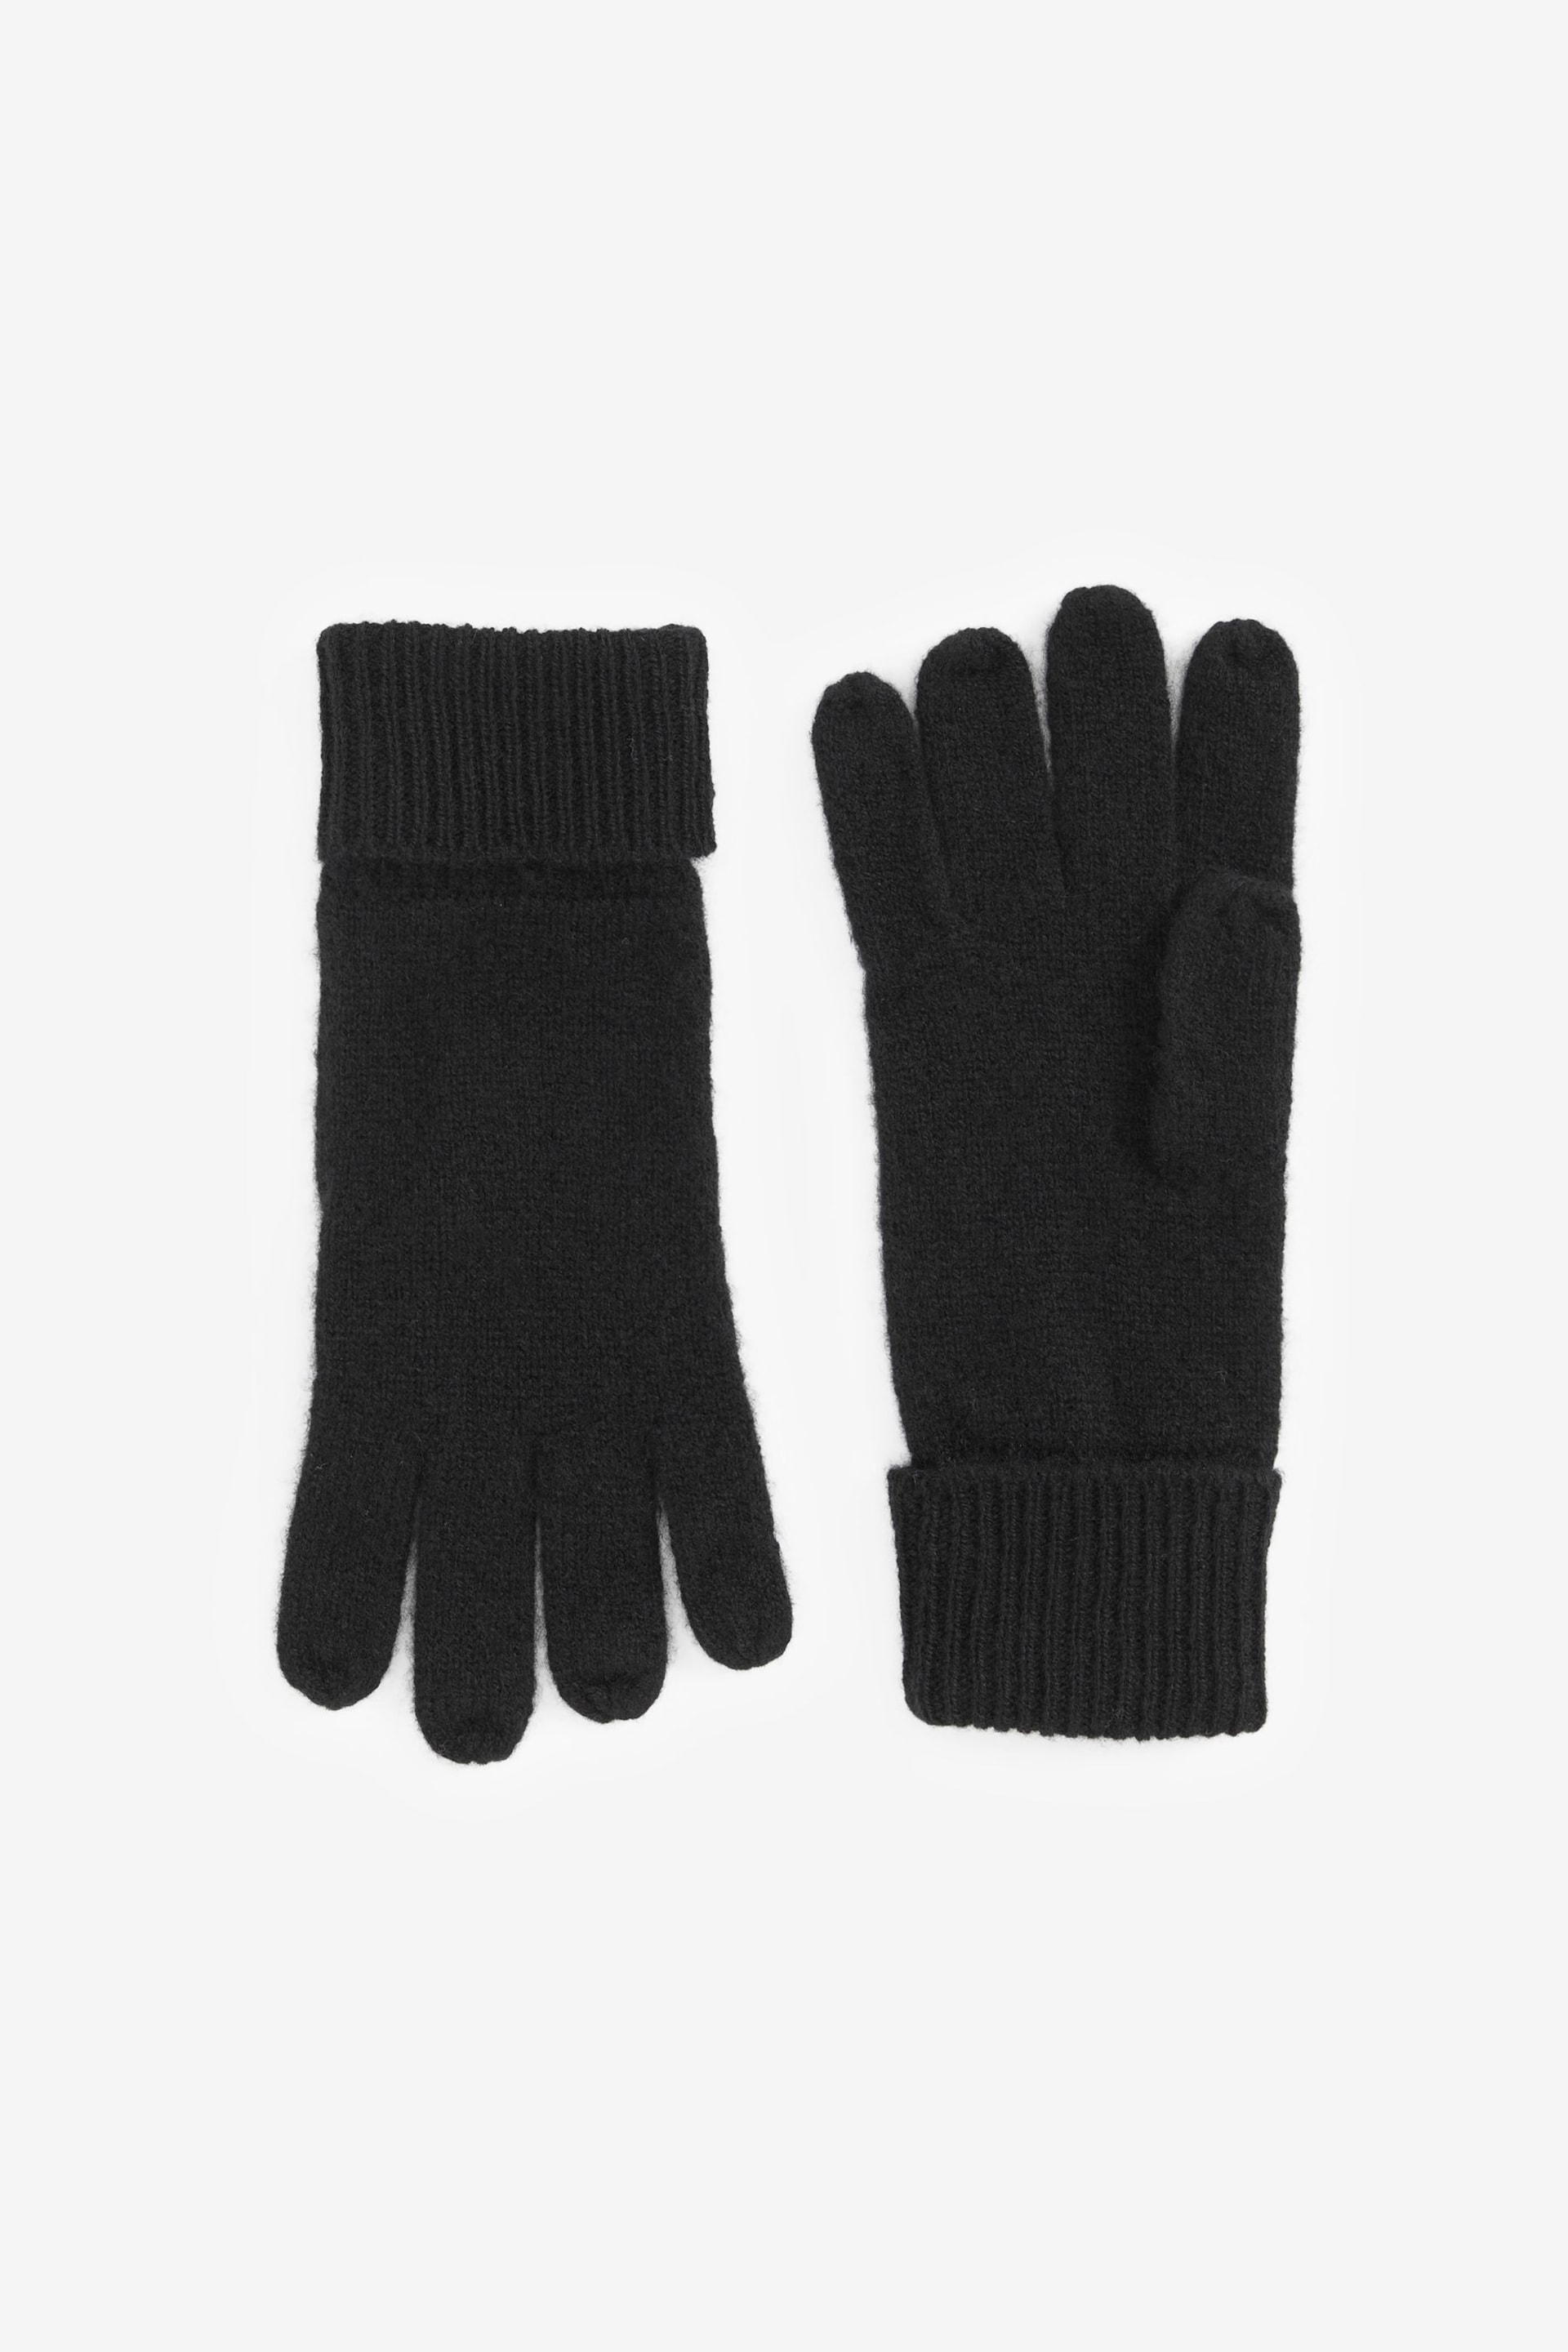 Black Collection Luxe 100% Cashmere Gloves - Image 4 of 4